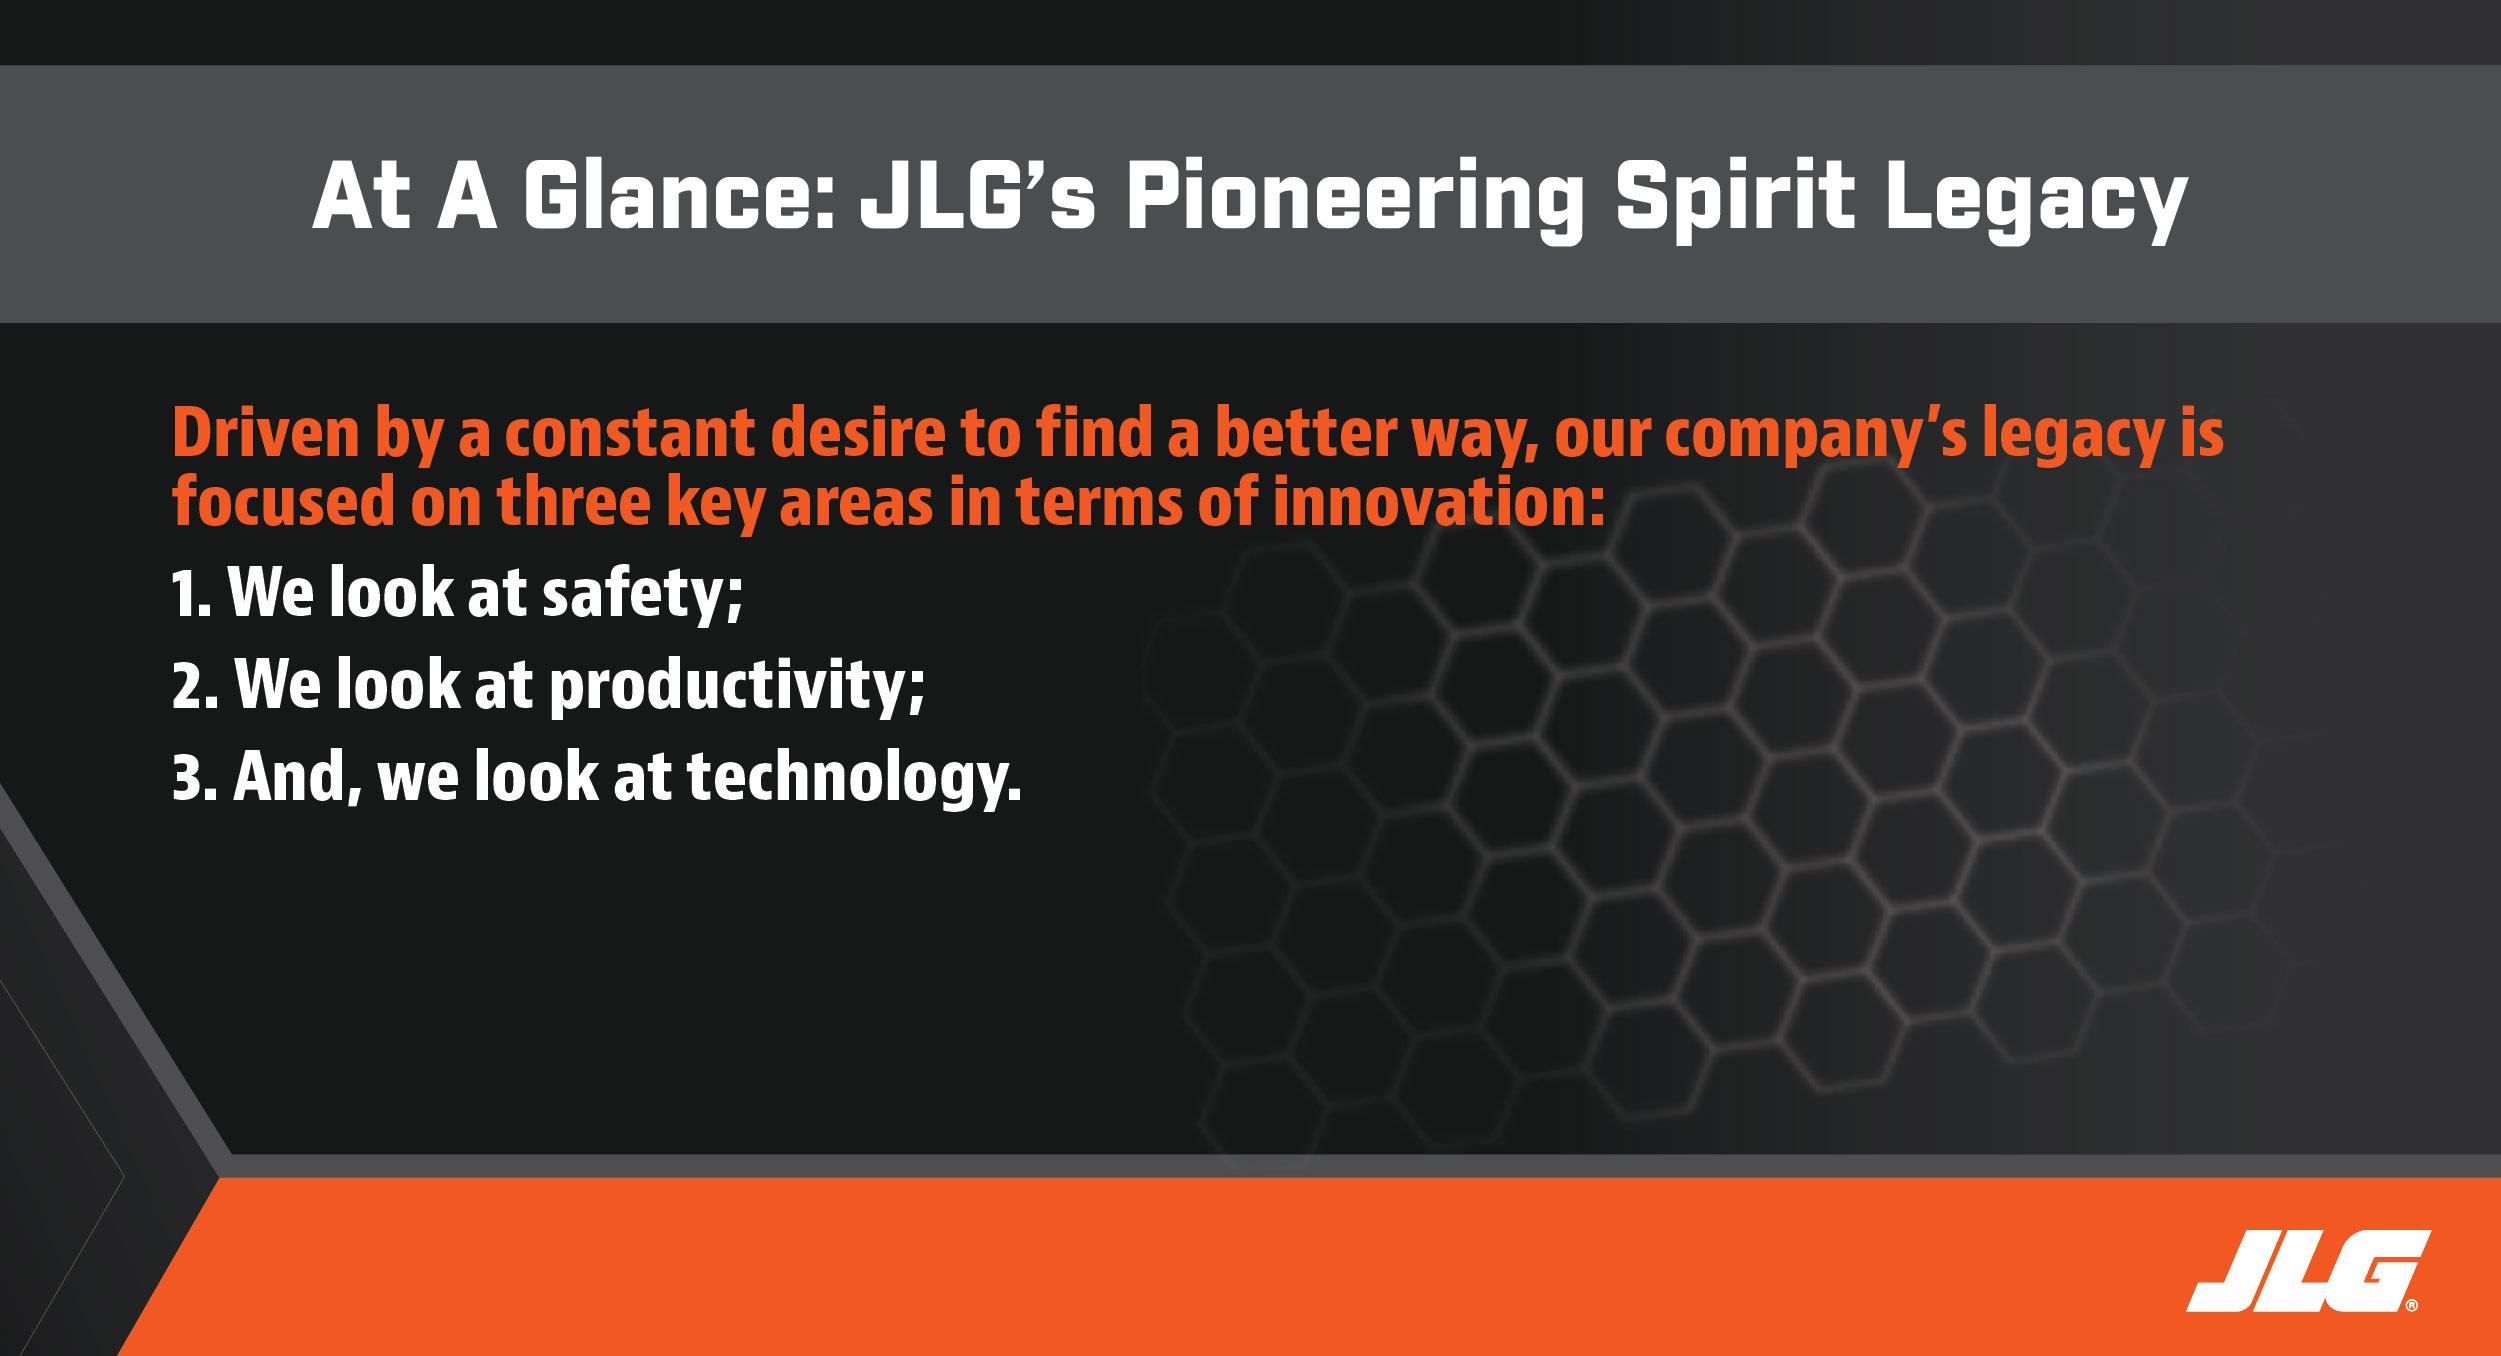 JLG’s Legacy: A Pioneering Spirit That Drives Productive, Safe Work at Height at a Glance